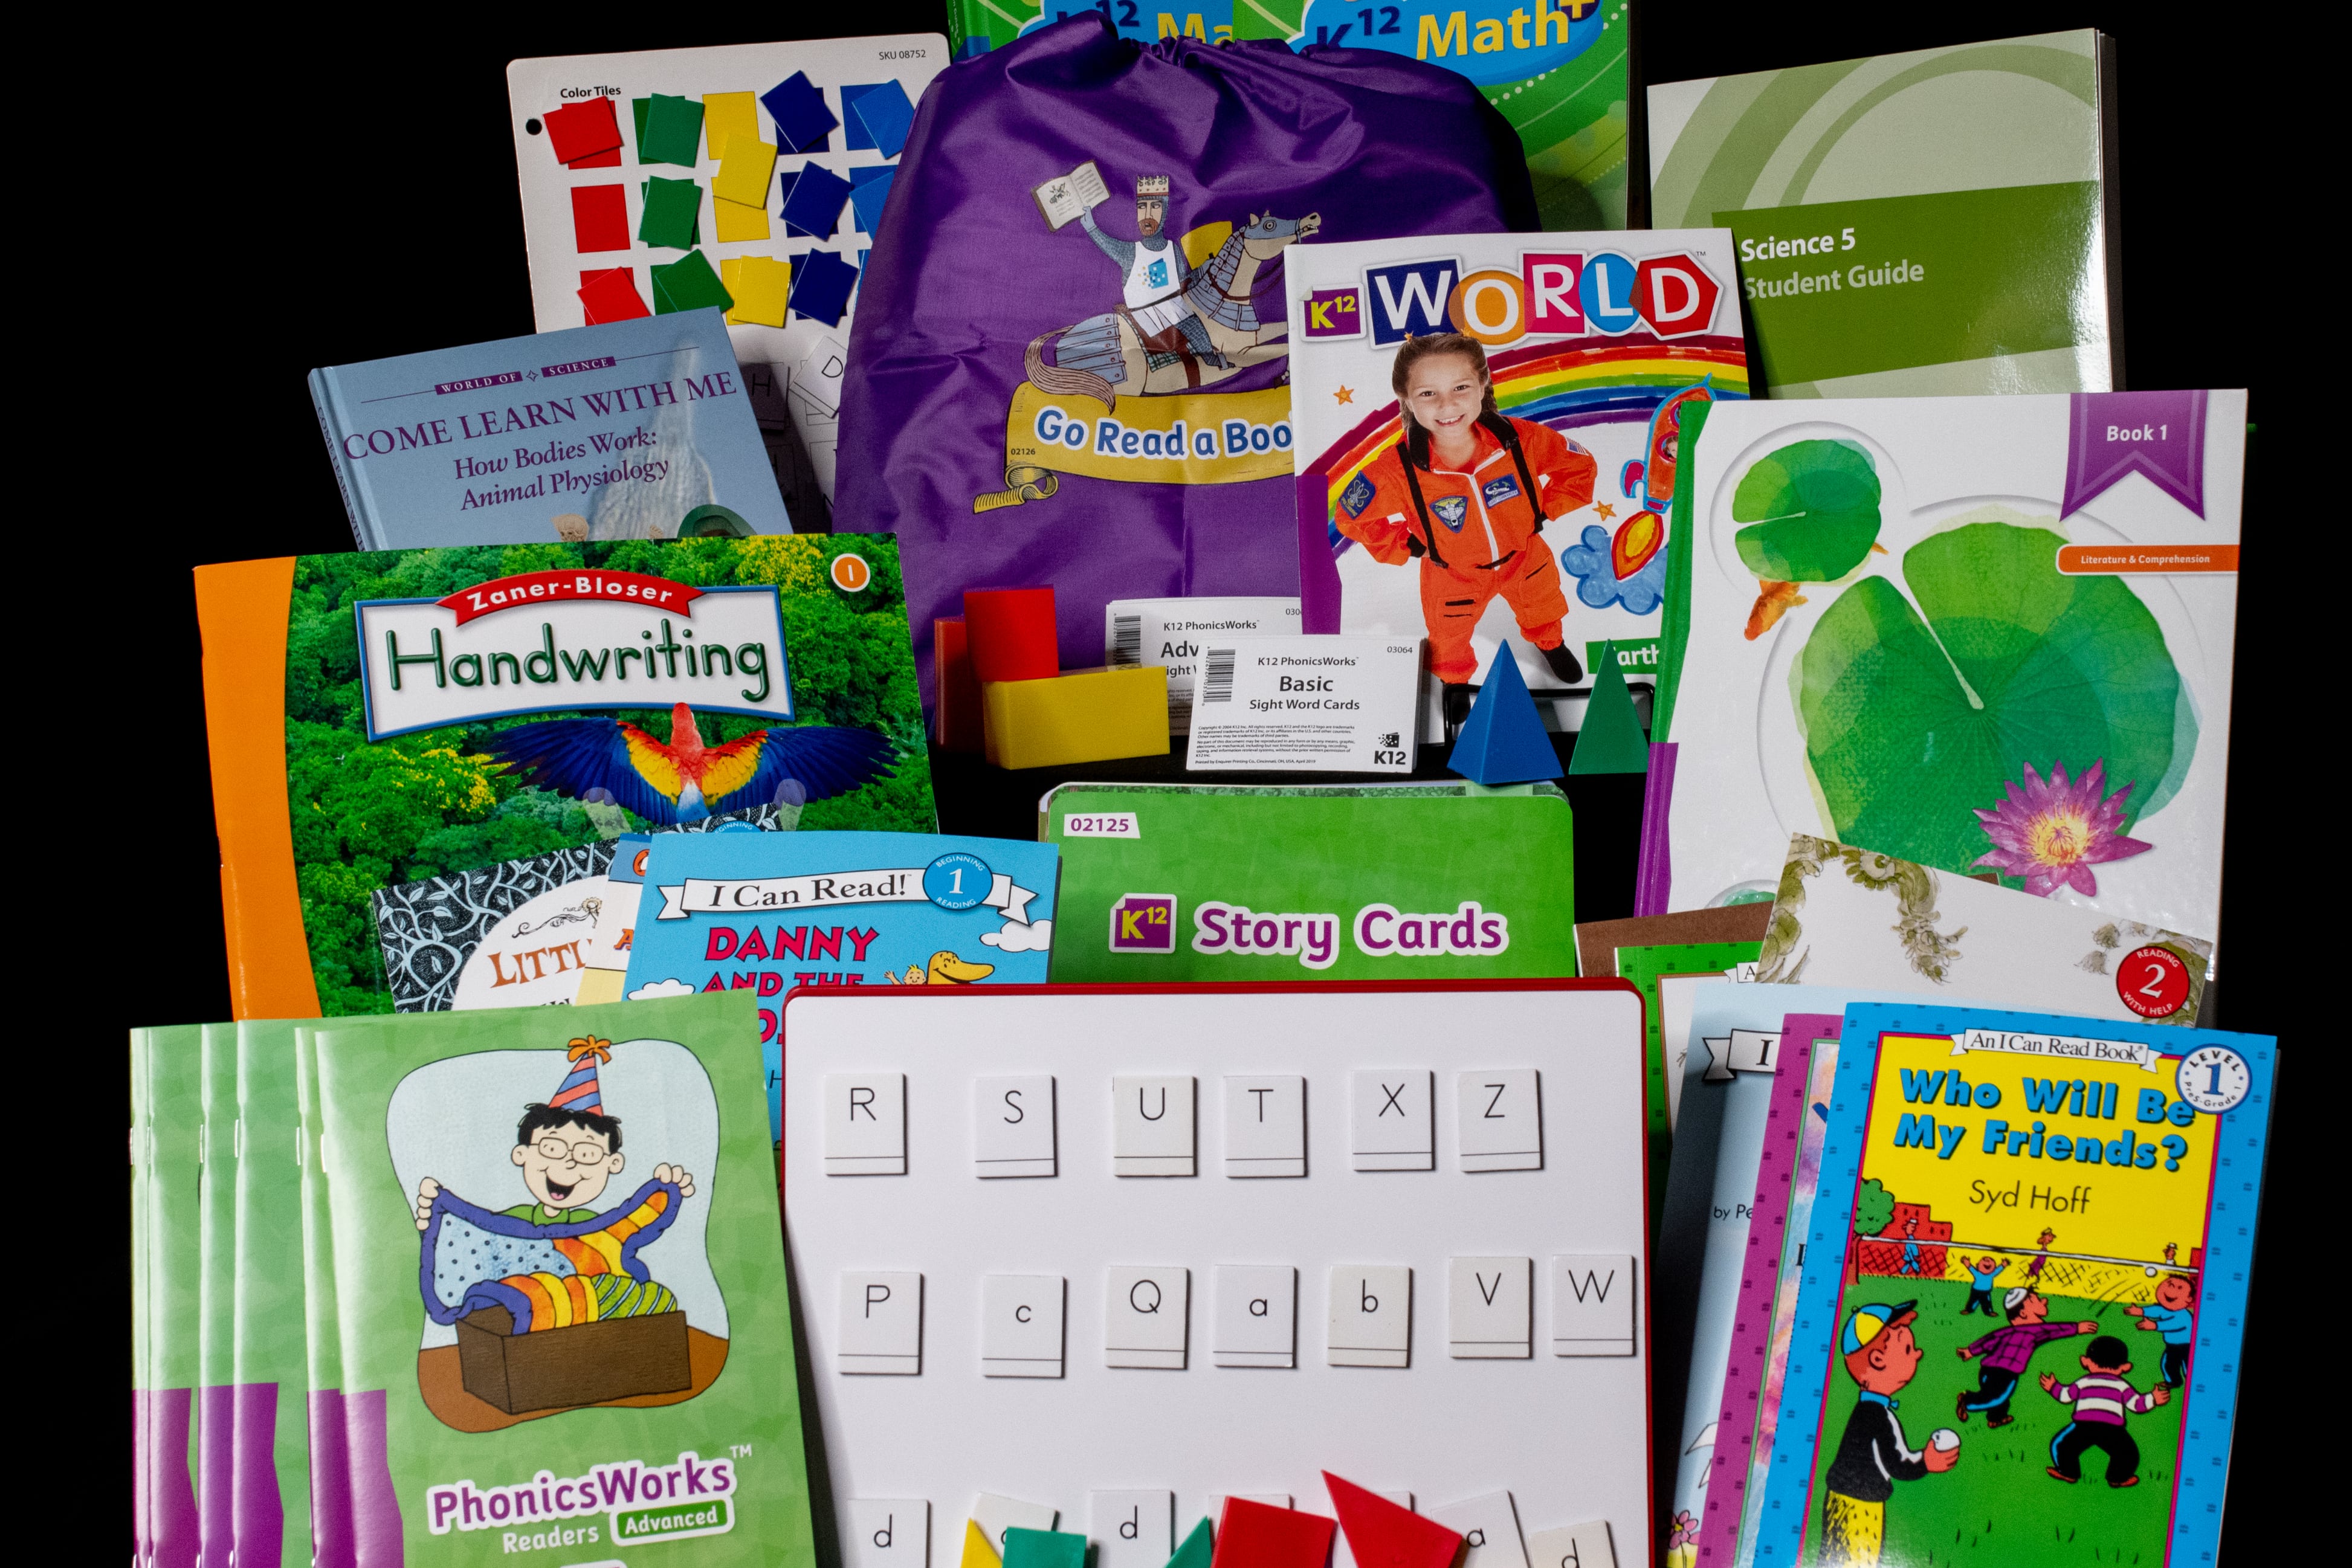 Sample curriculum for elementary school, including books, learning tools, math workbooks, letter boards, and more